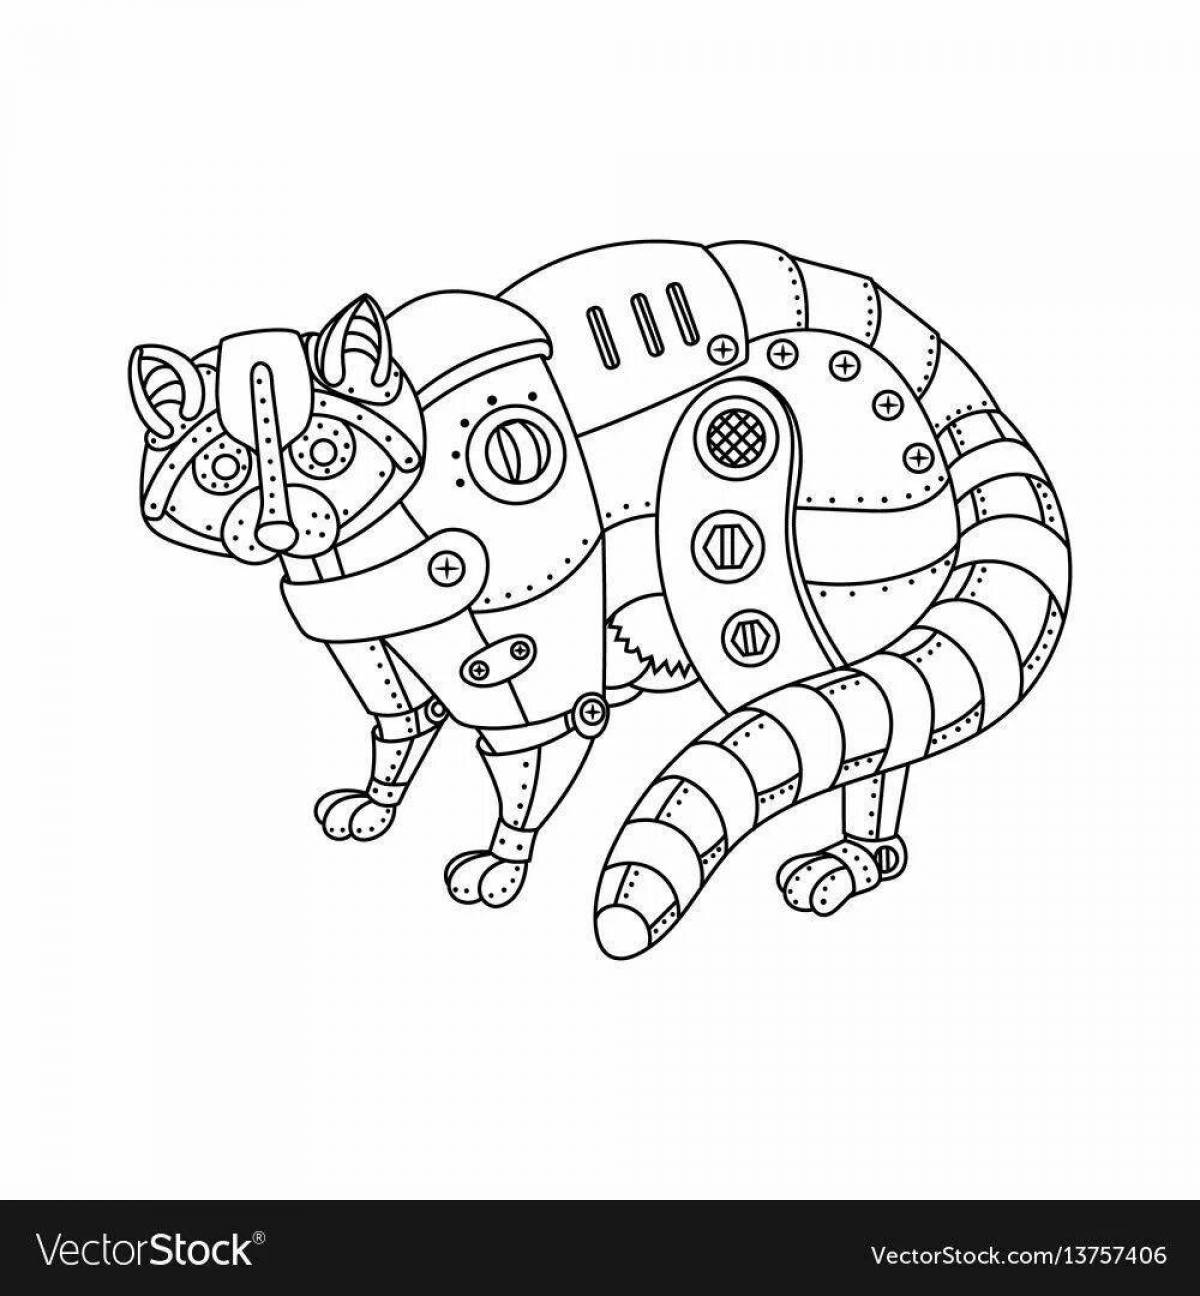 Coloring page spectacular robot cat